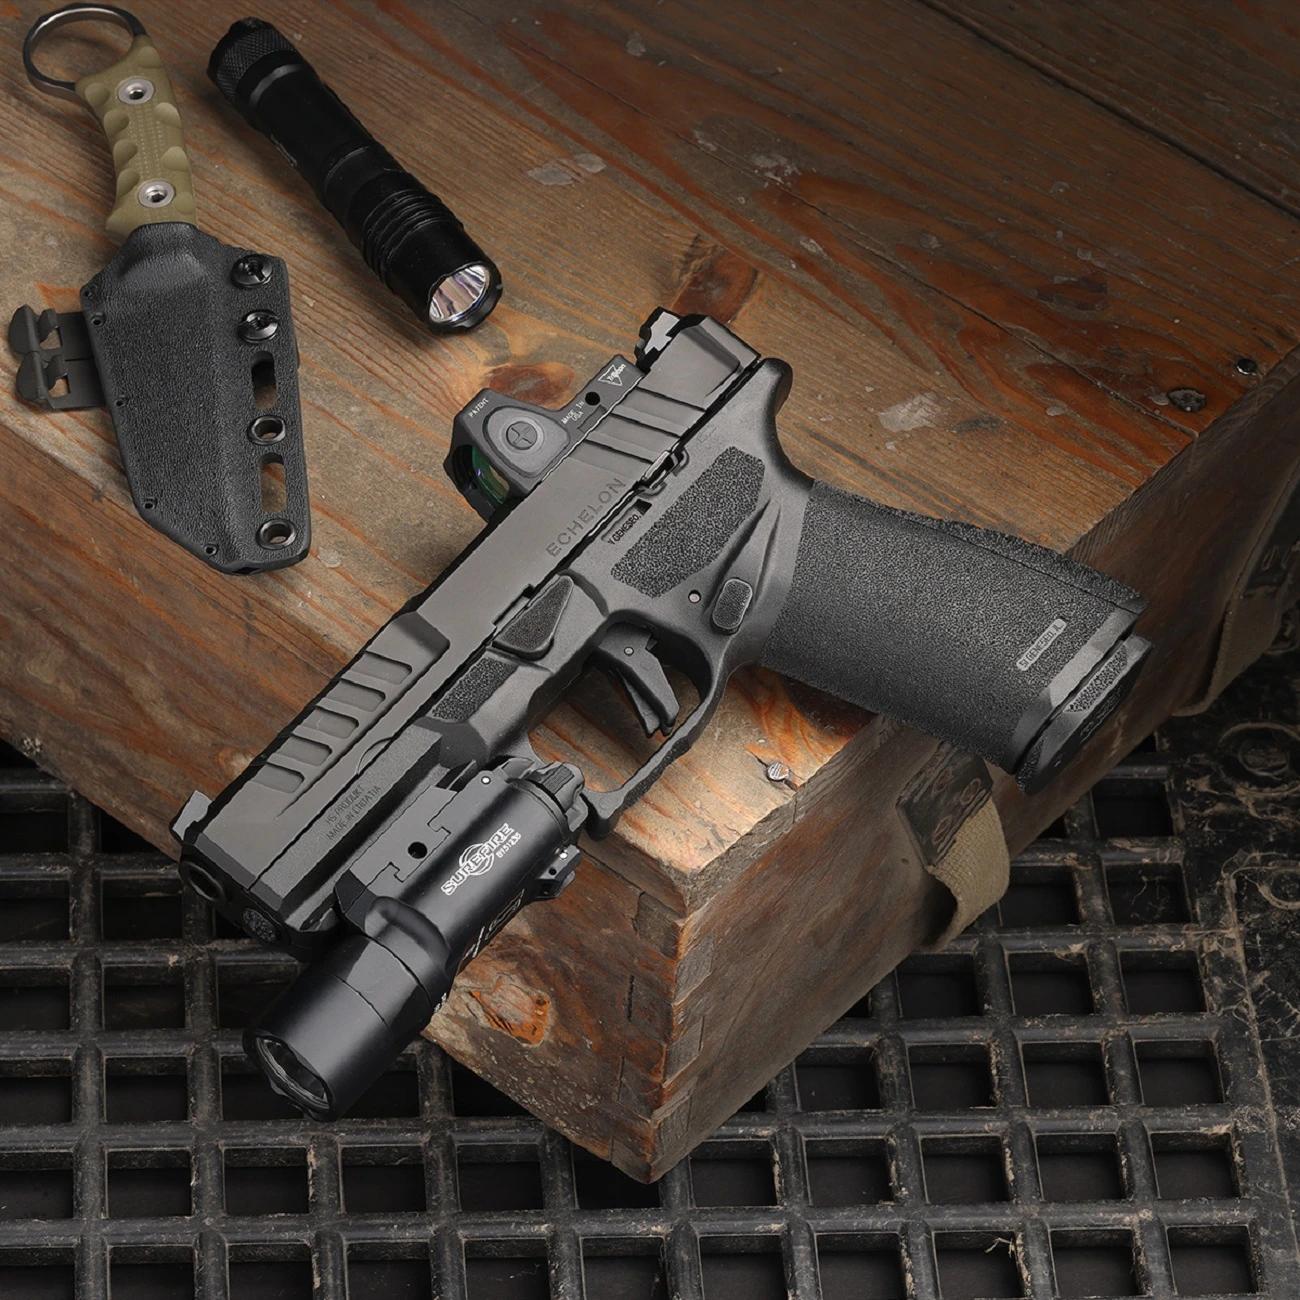 The Echelon in its initial format is very Glock 17-ish